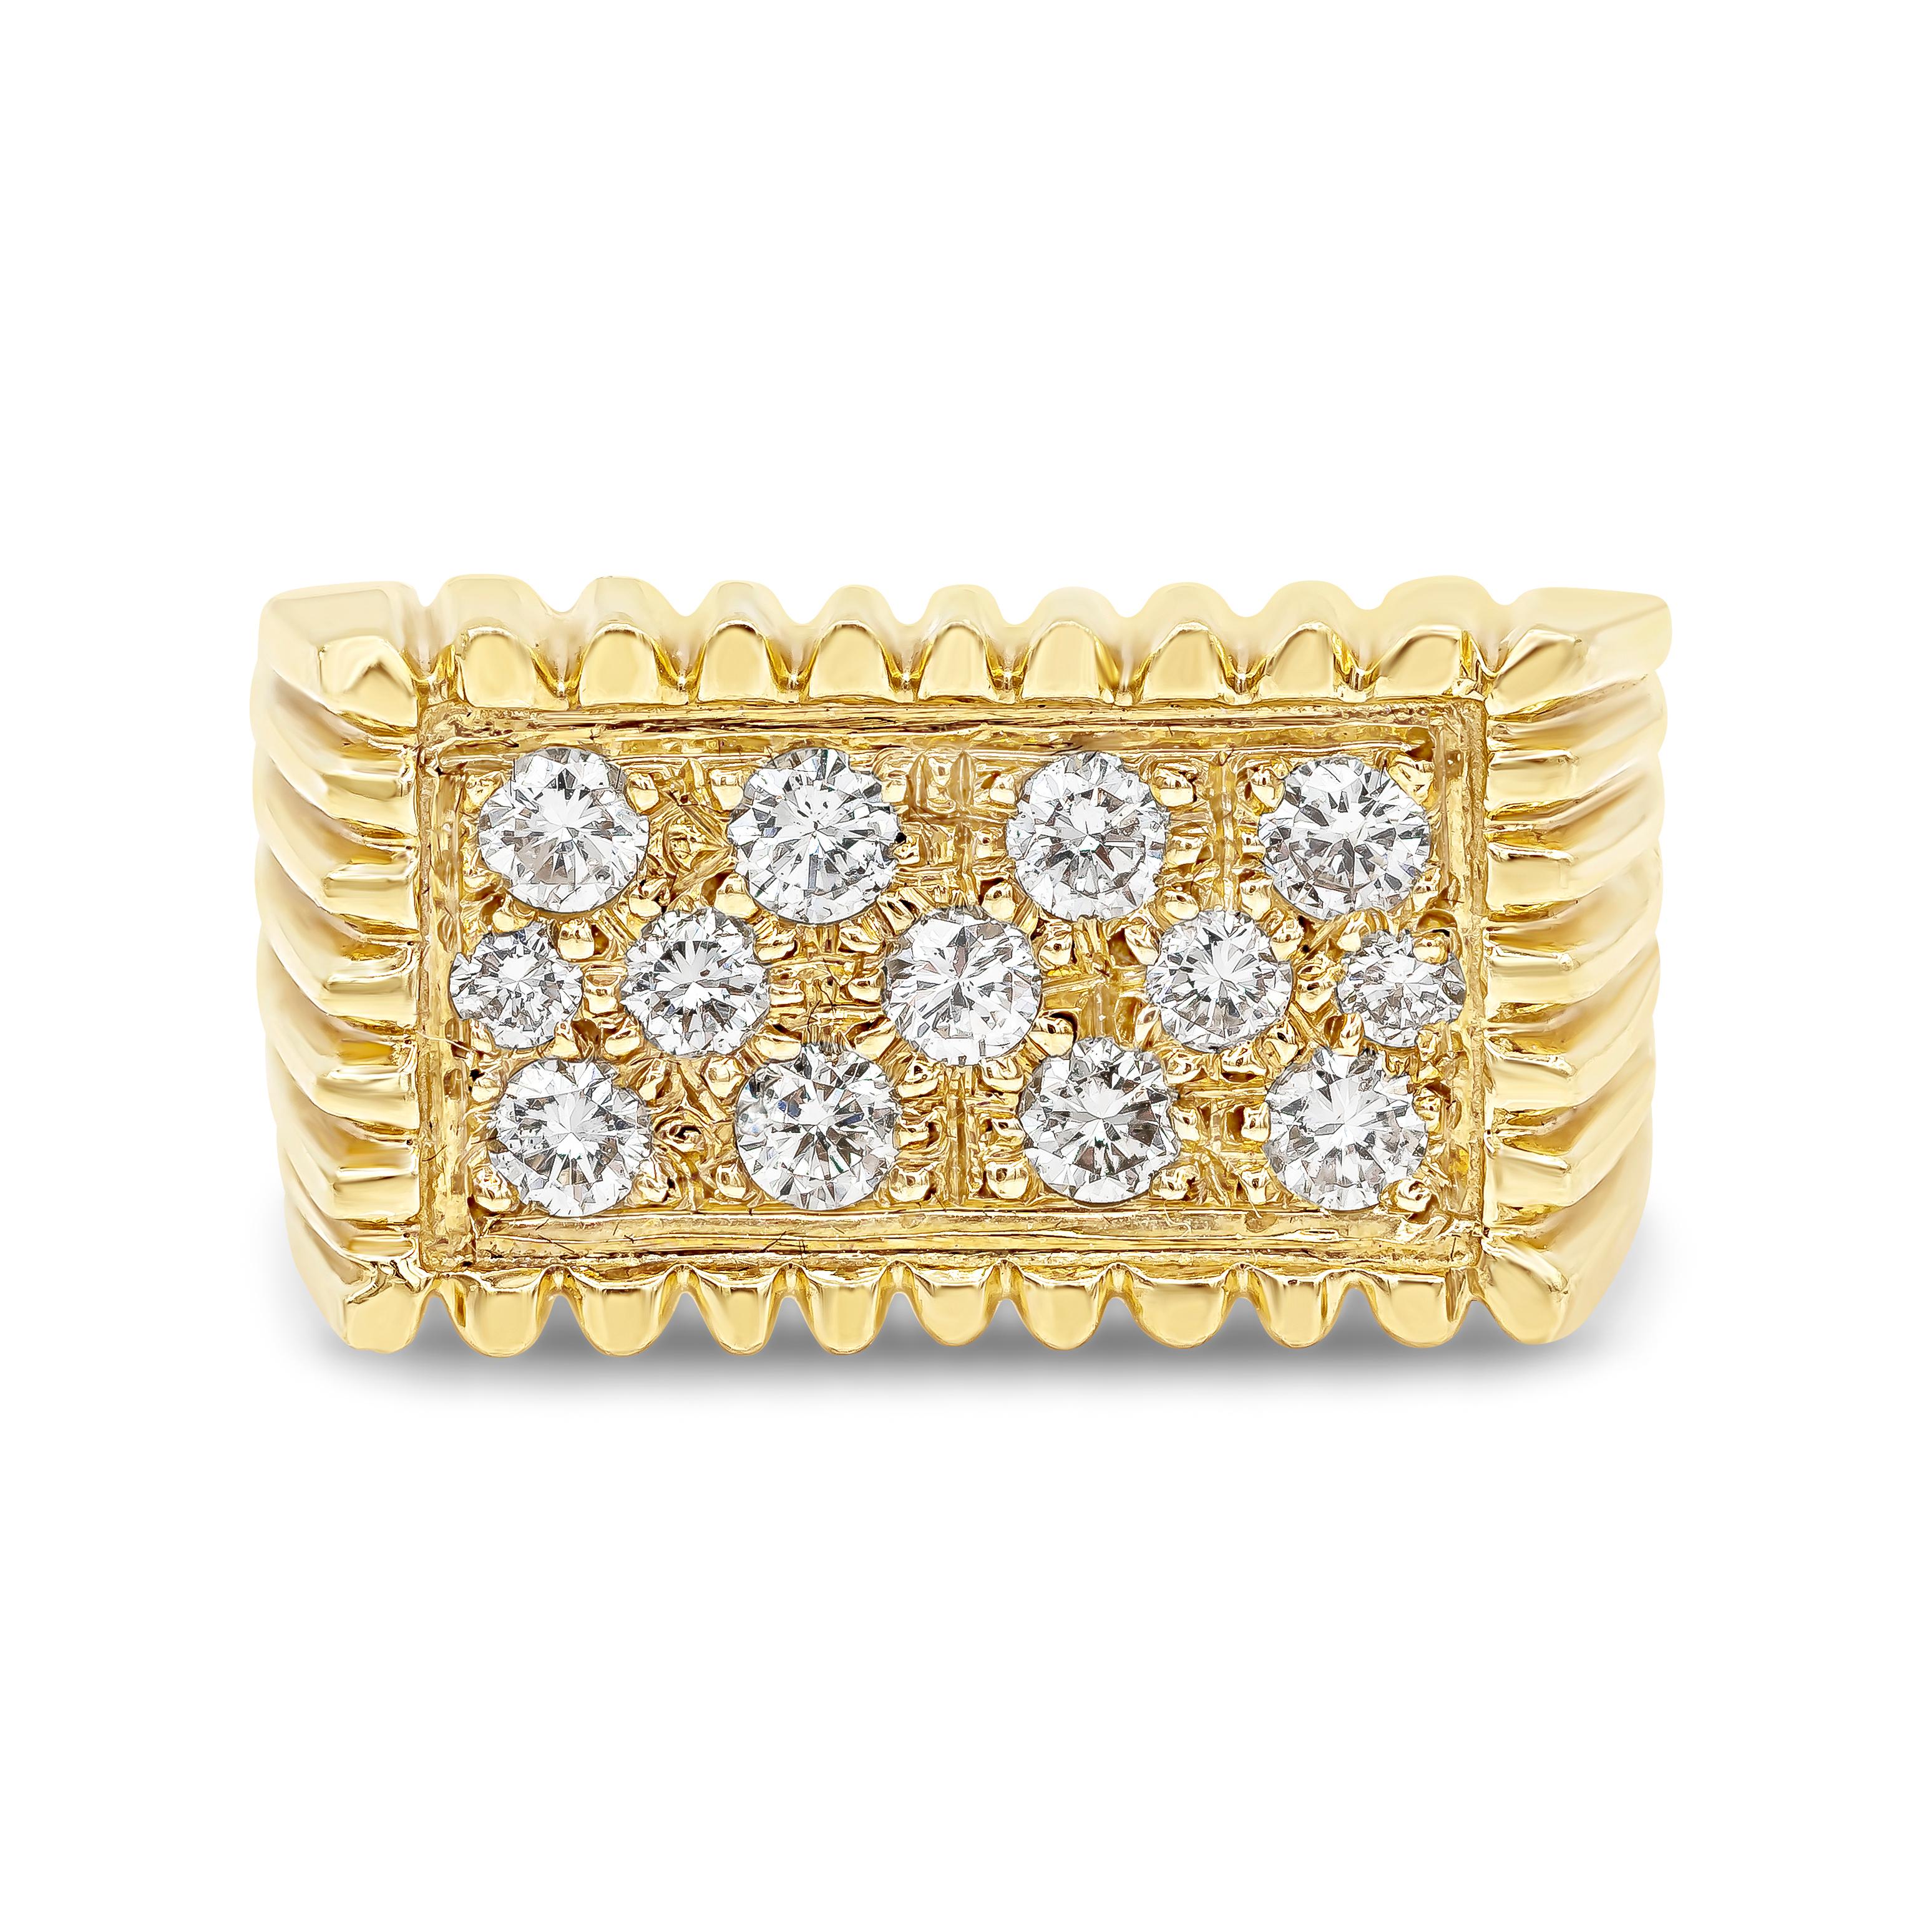 A chic men's fashion ring showcasing round brilliant diamonds, set in a flat 14K yellow gold mounting. Finished with bar edges to add to its modern look. Diamonds weigh 1.02 carats total. Size 8.5 US, resizable upon request.

Roman Malakov is a